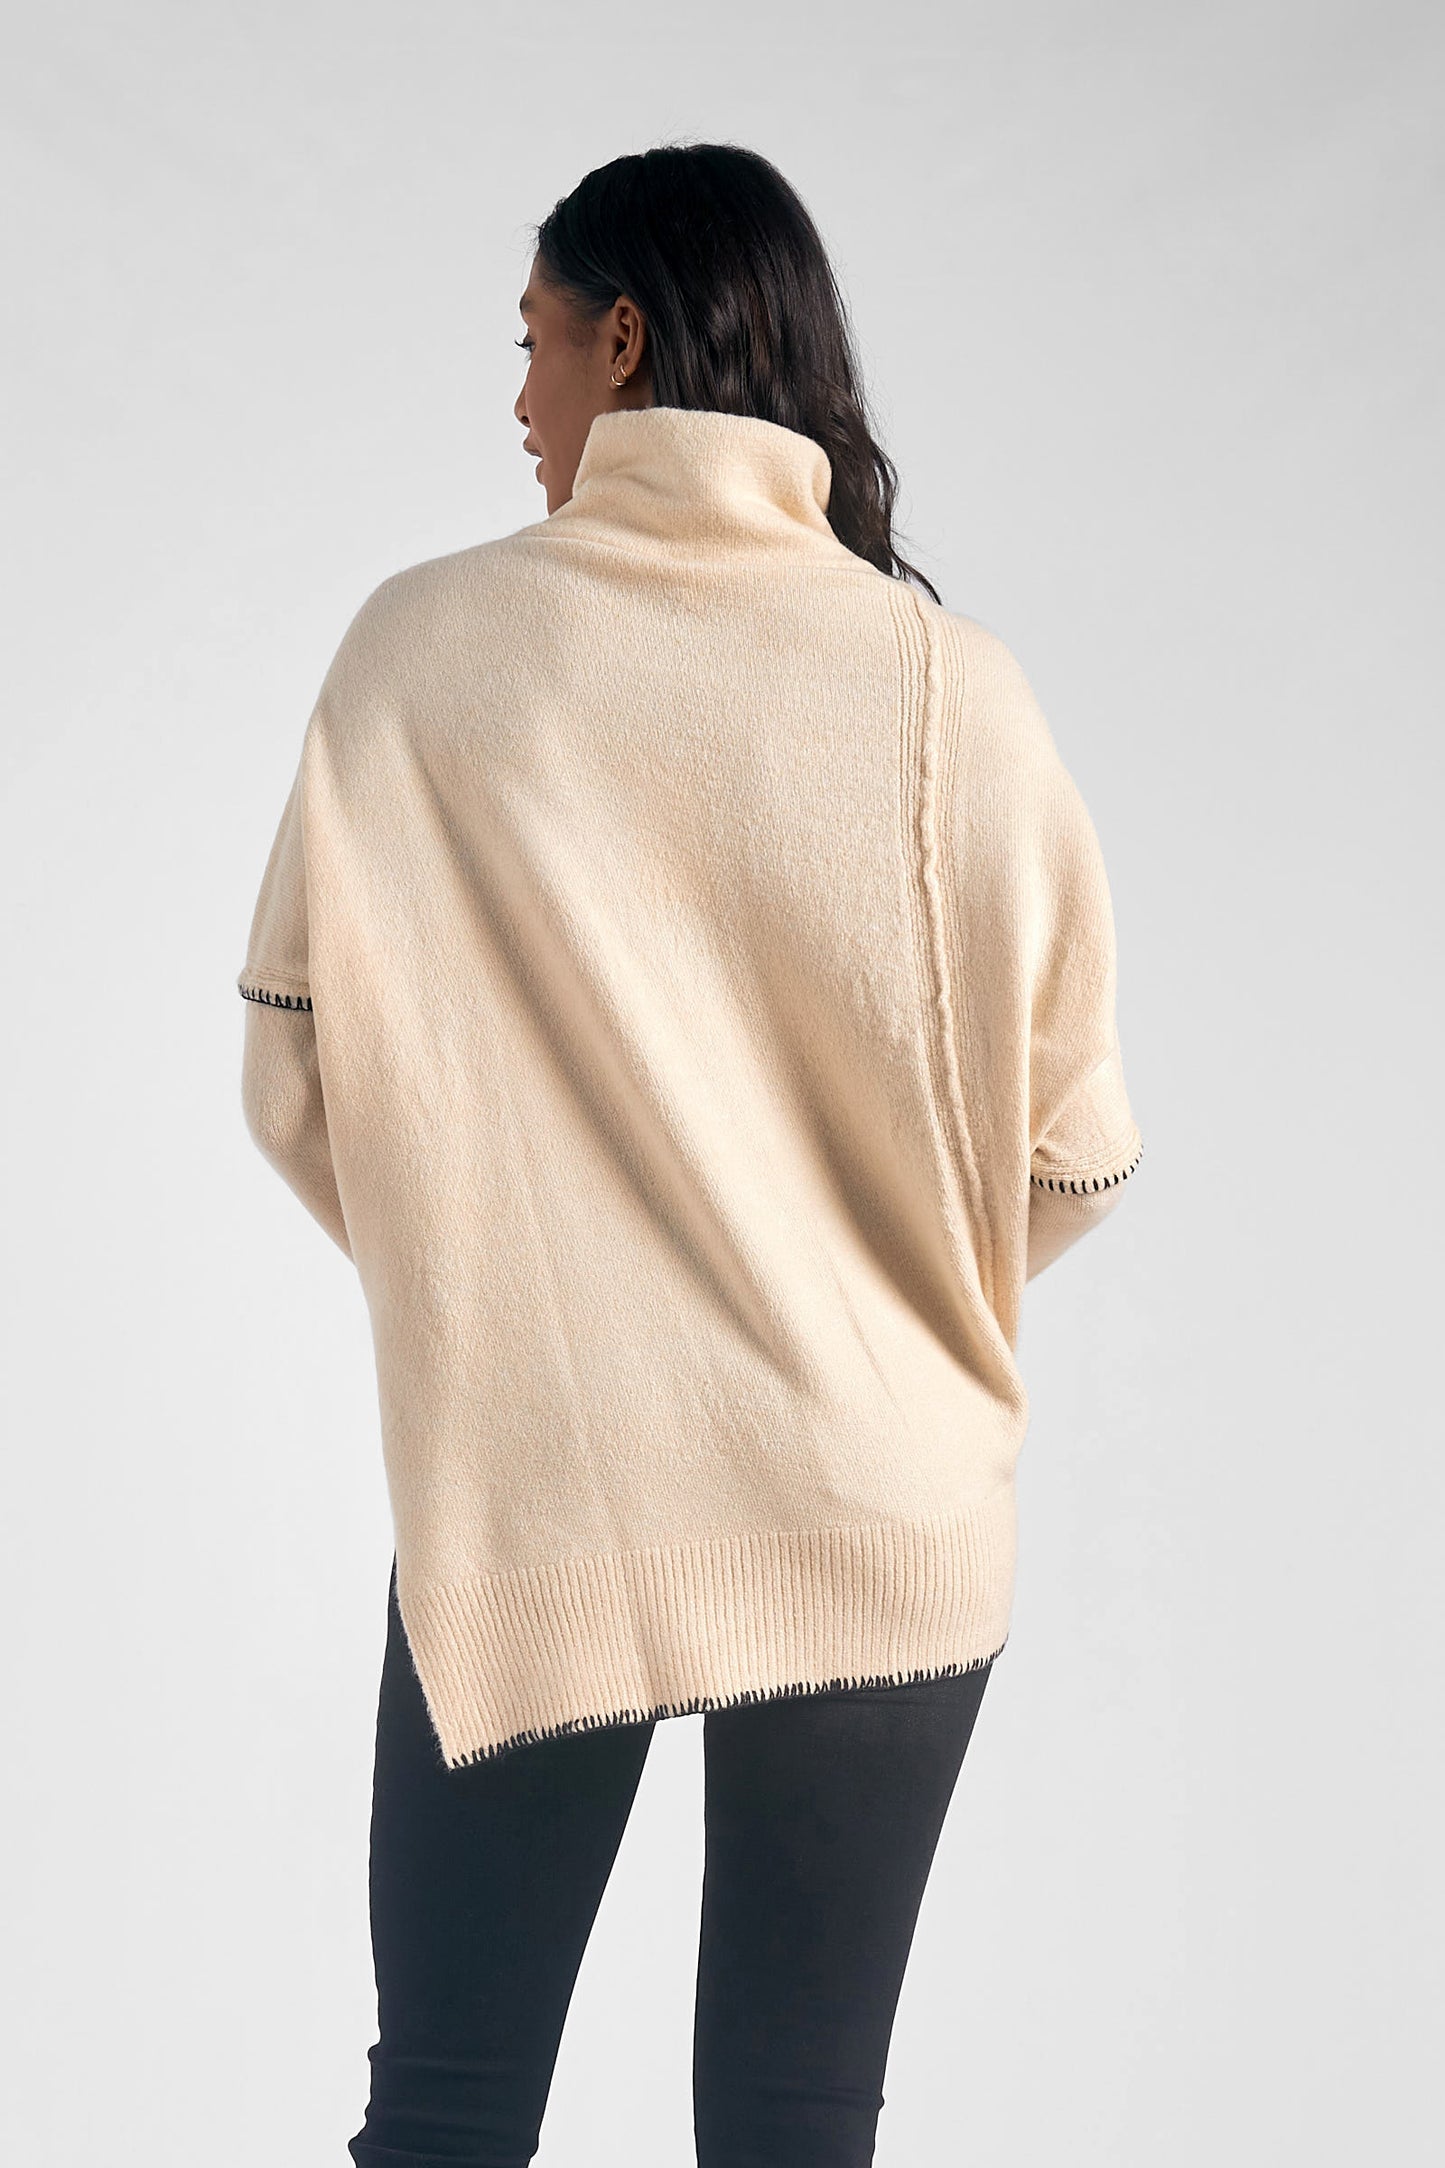 All Stitched Up Asymmetrical Sweater